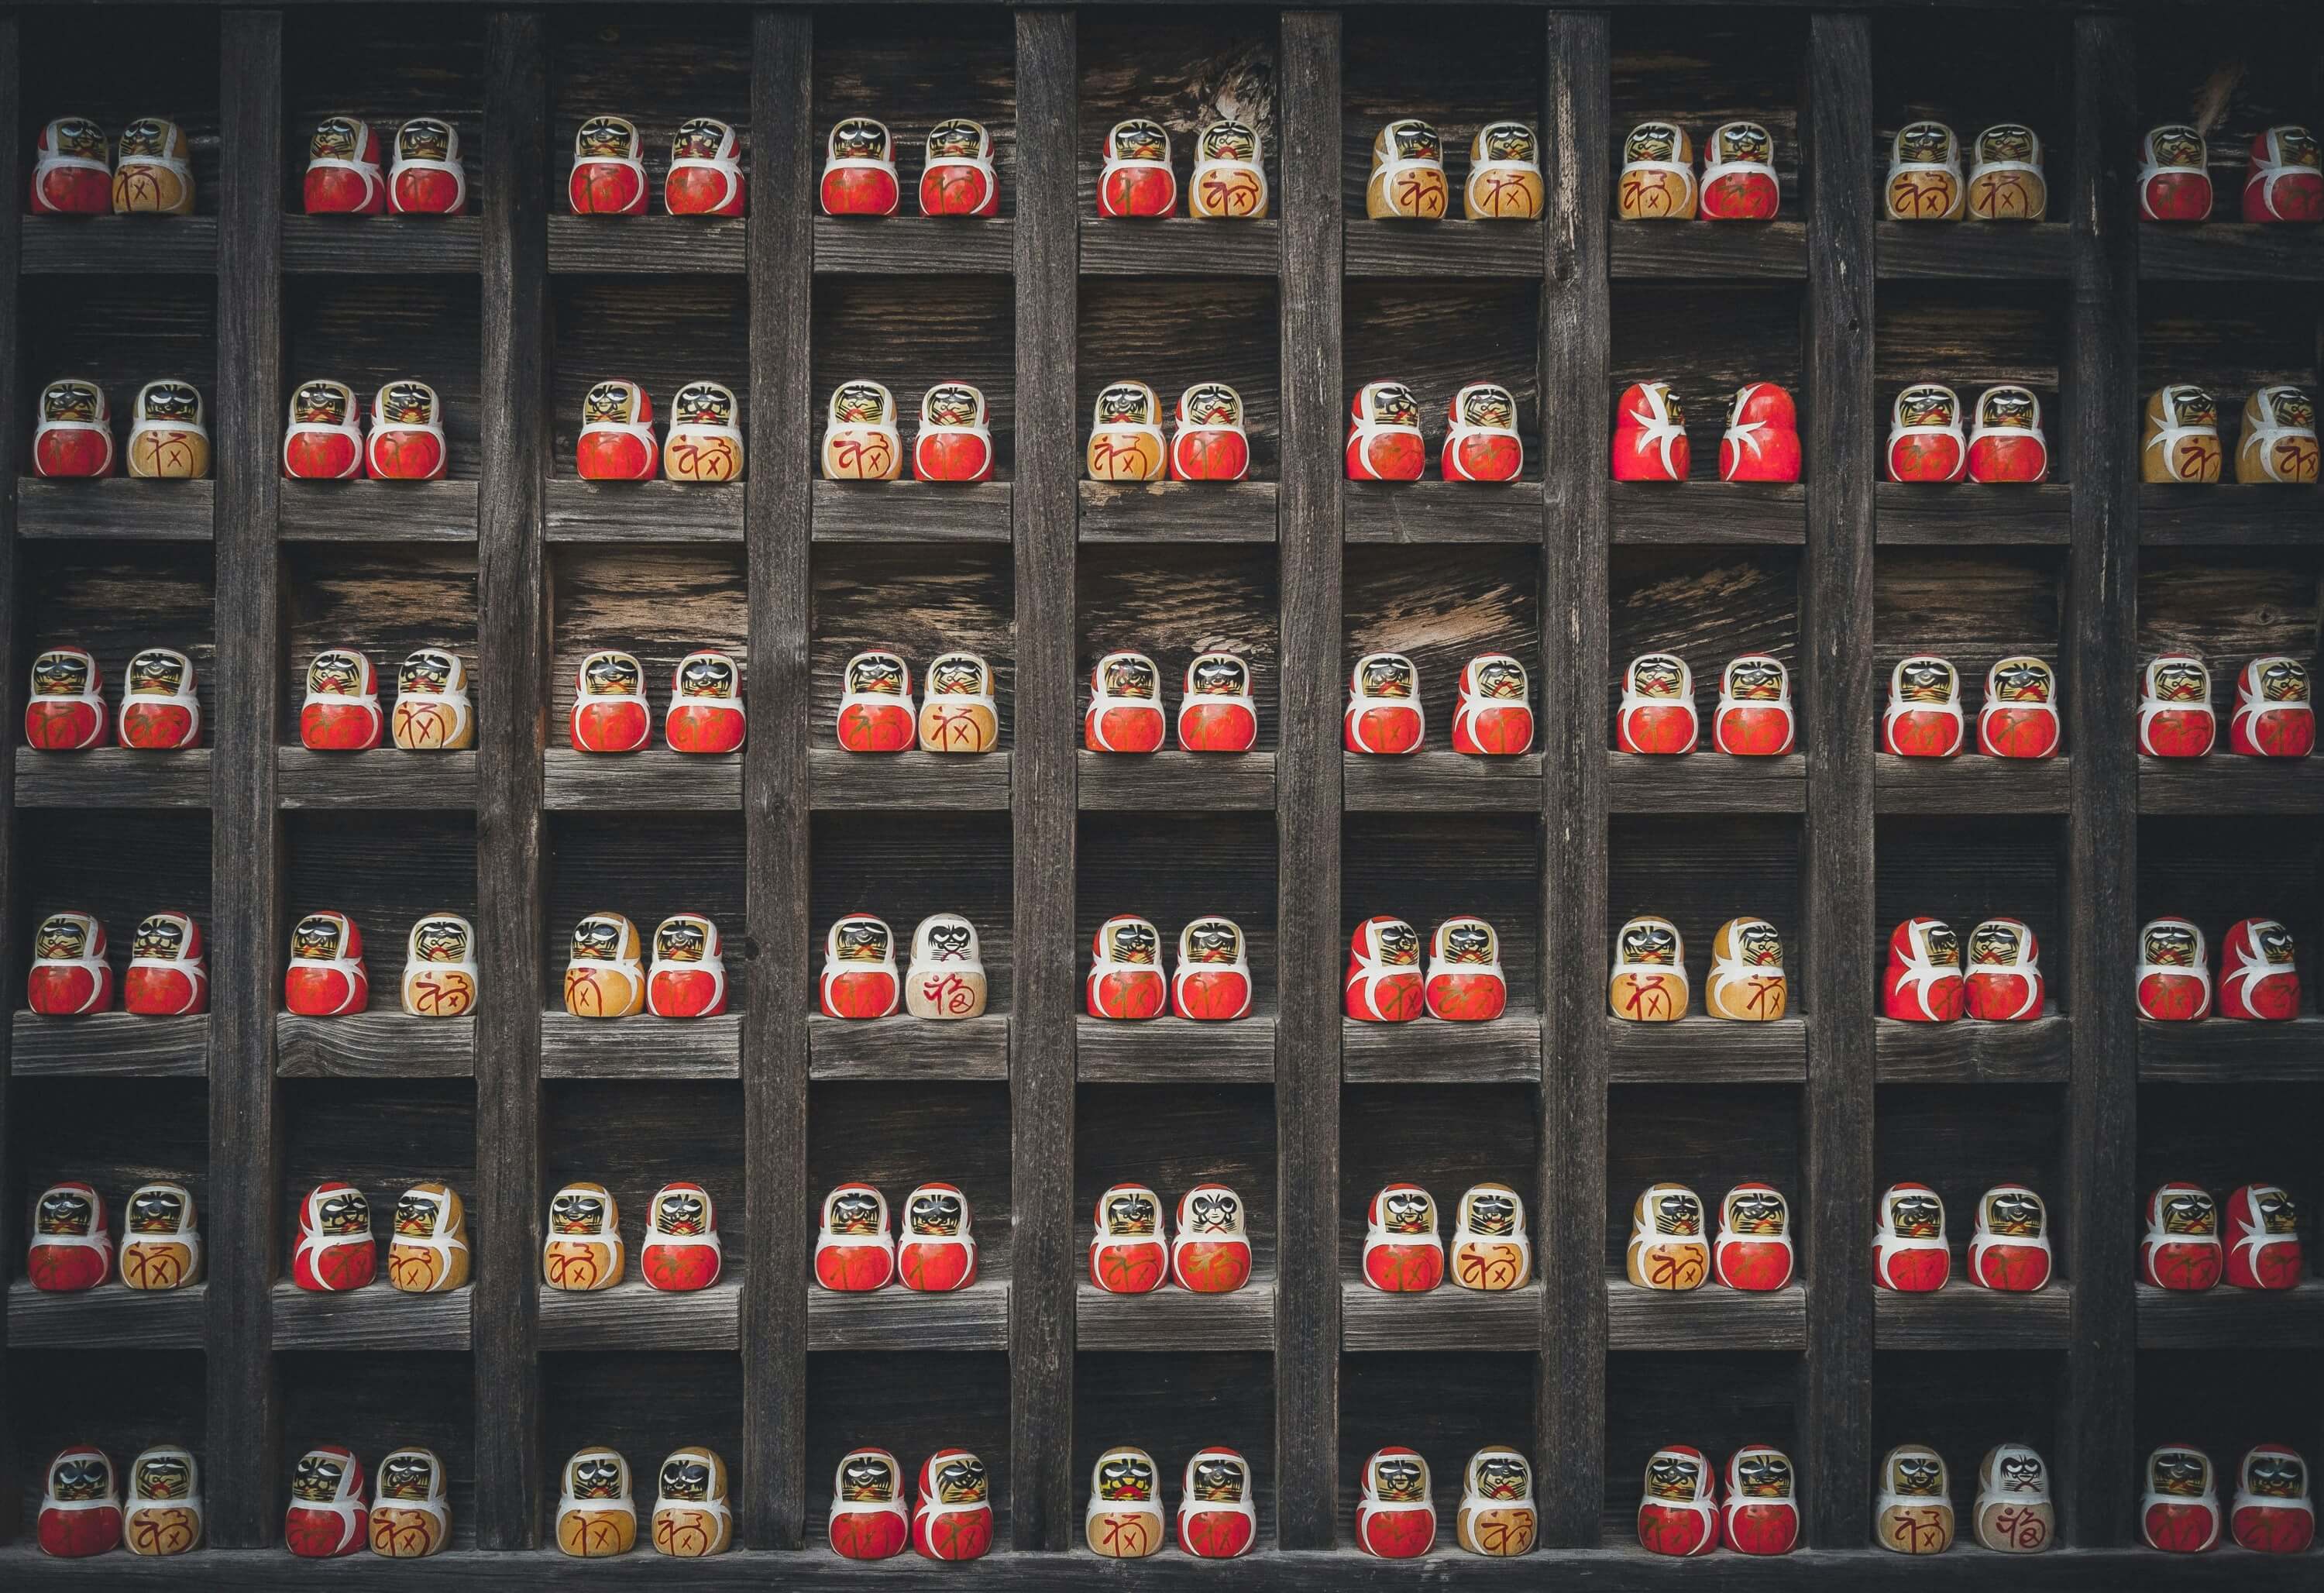 Shop shelves packed with neatly organized nesting dolls